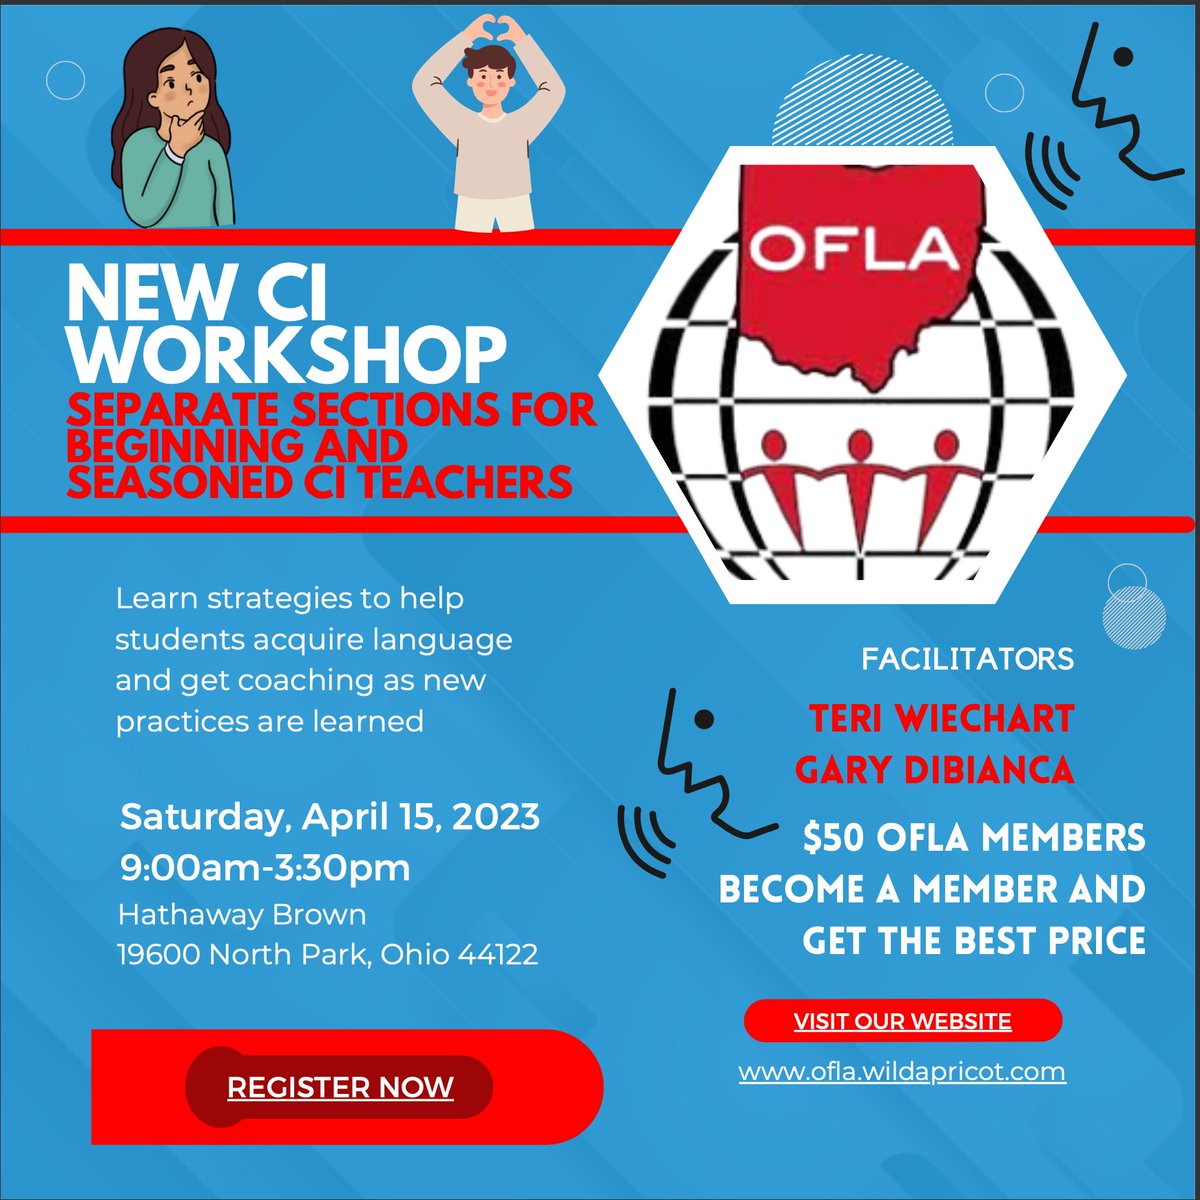 Join us for the CI Workshop Saturday April 15, 2023 at Hathaway Brown. The cost is $50 for OFLA Members. Complete information is available at ofla.wildapricot.org/page-418057